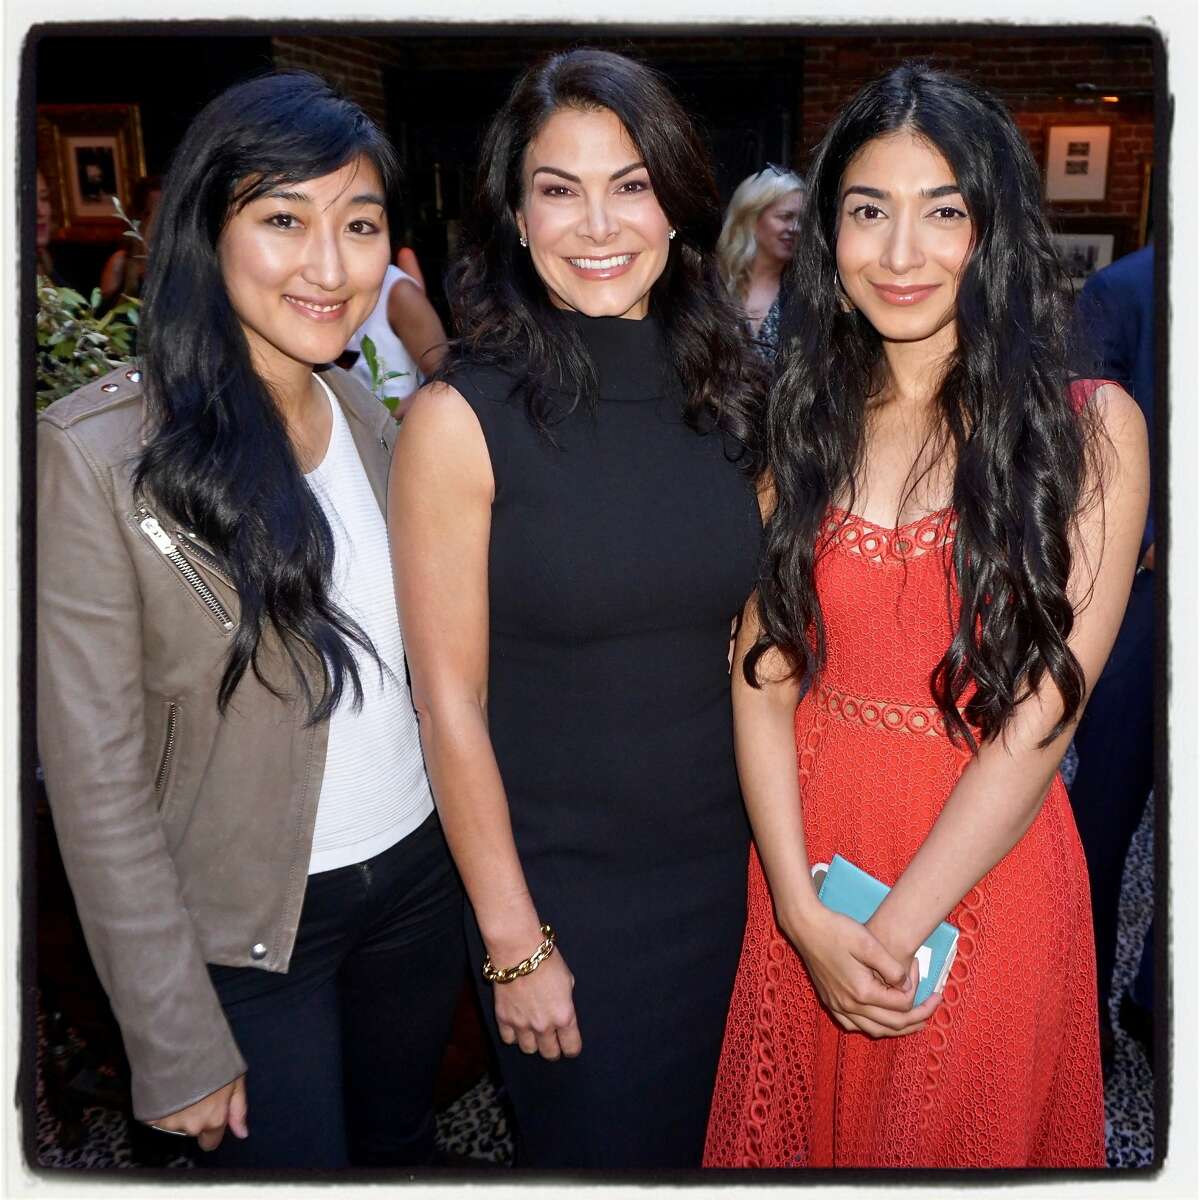 Elle Women in Tech honorees (from left) Jess Lee, Belinda Johnson and Shiza Shadid at Wayfare Tavern. July 12, 2017.